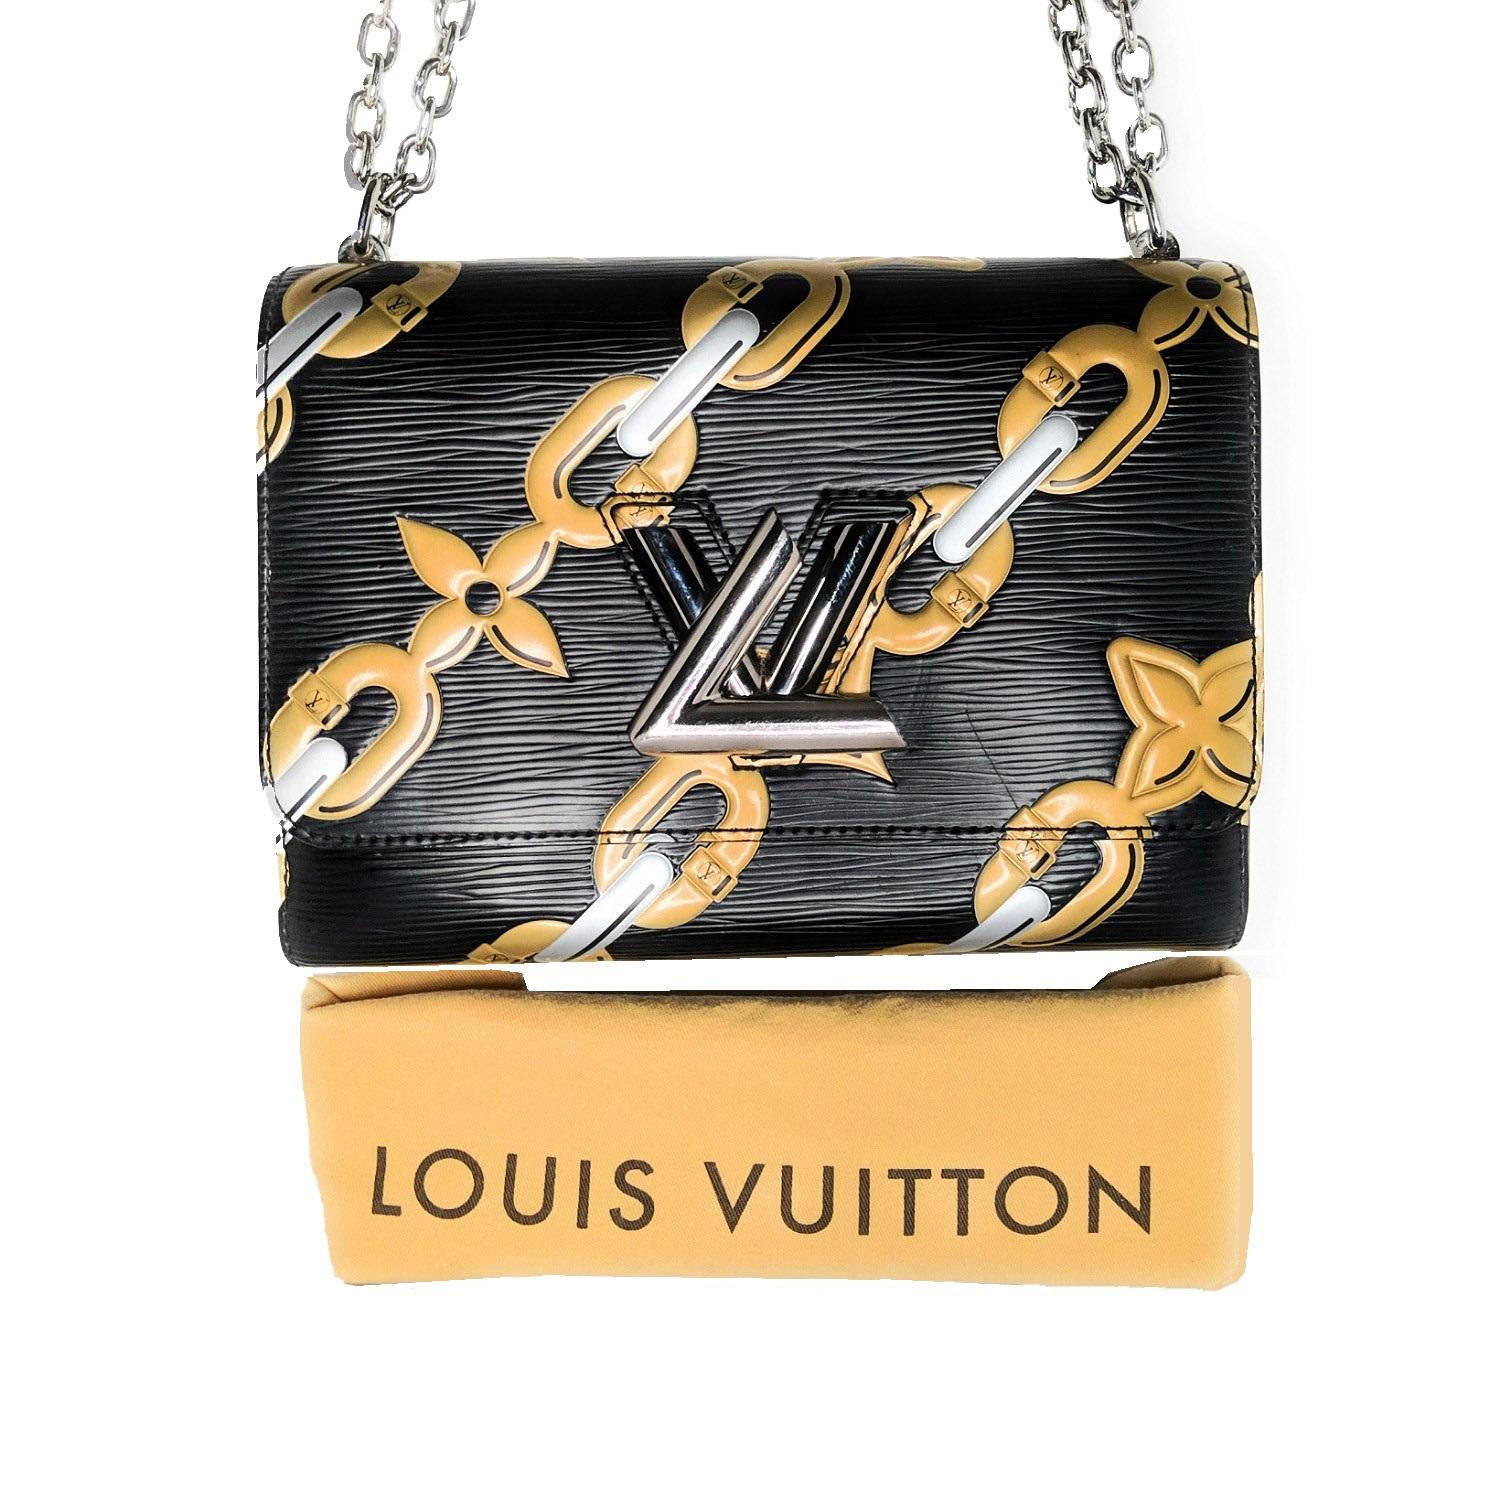 The Louis Vuitton Epi Chain Flower Twist MM is the creation of creative director Nicolas Ghesquiere and is part of the Spring 2016 Chain Flower print. This Twist MM takes the floral motifs from LV's signature monograms and transforms them into links